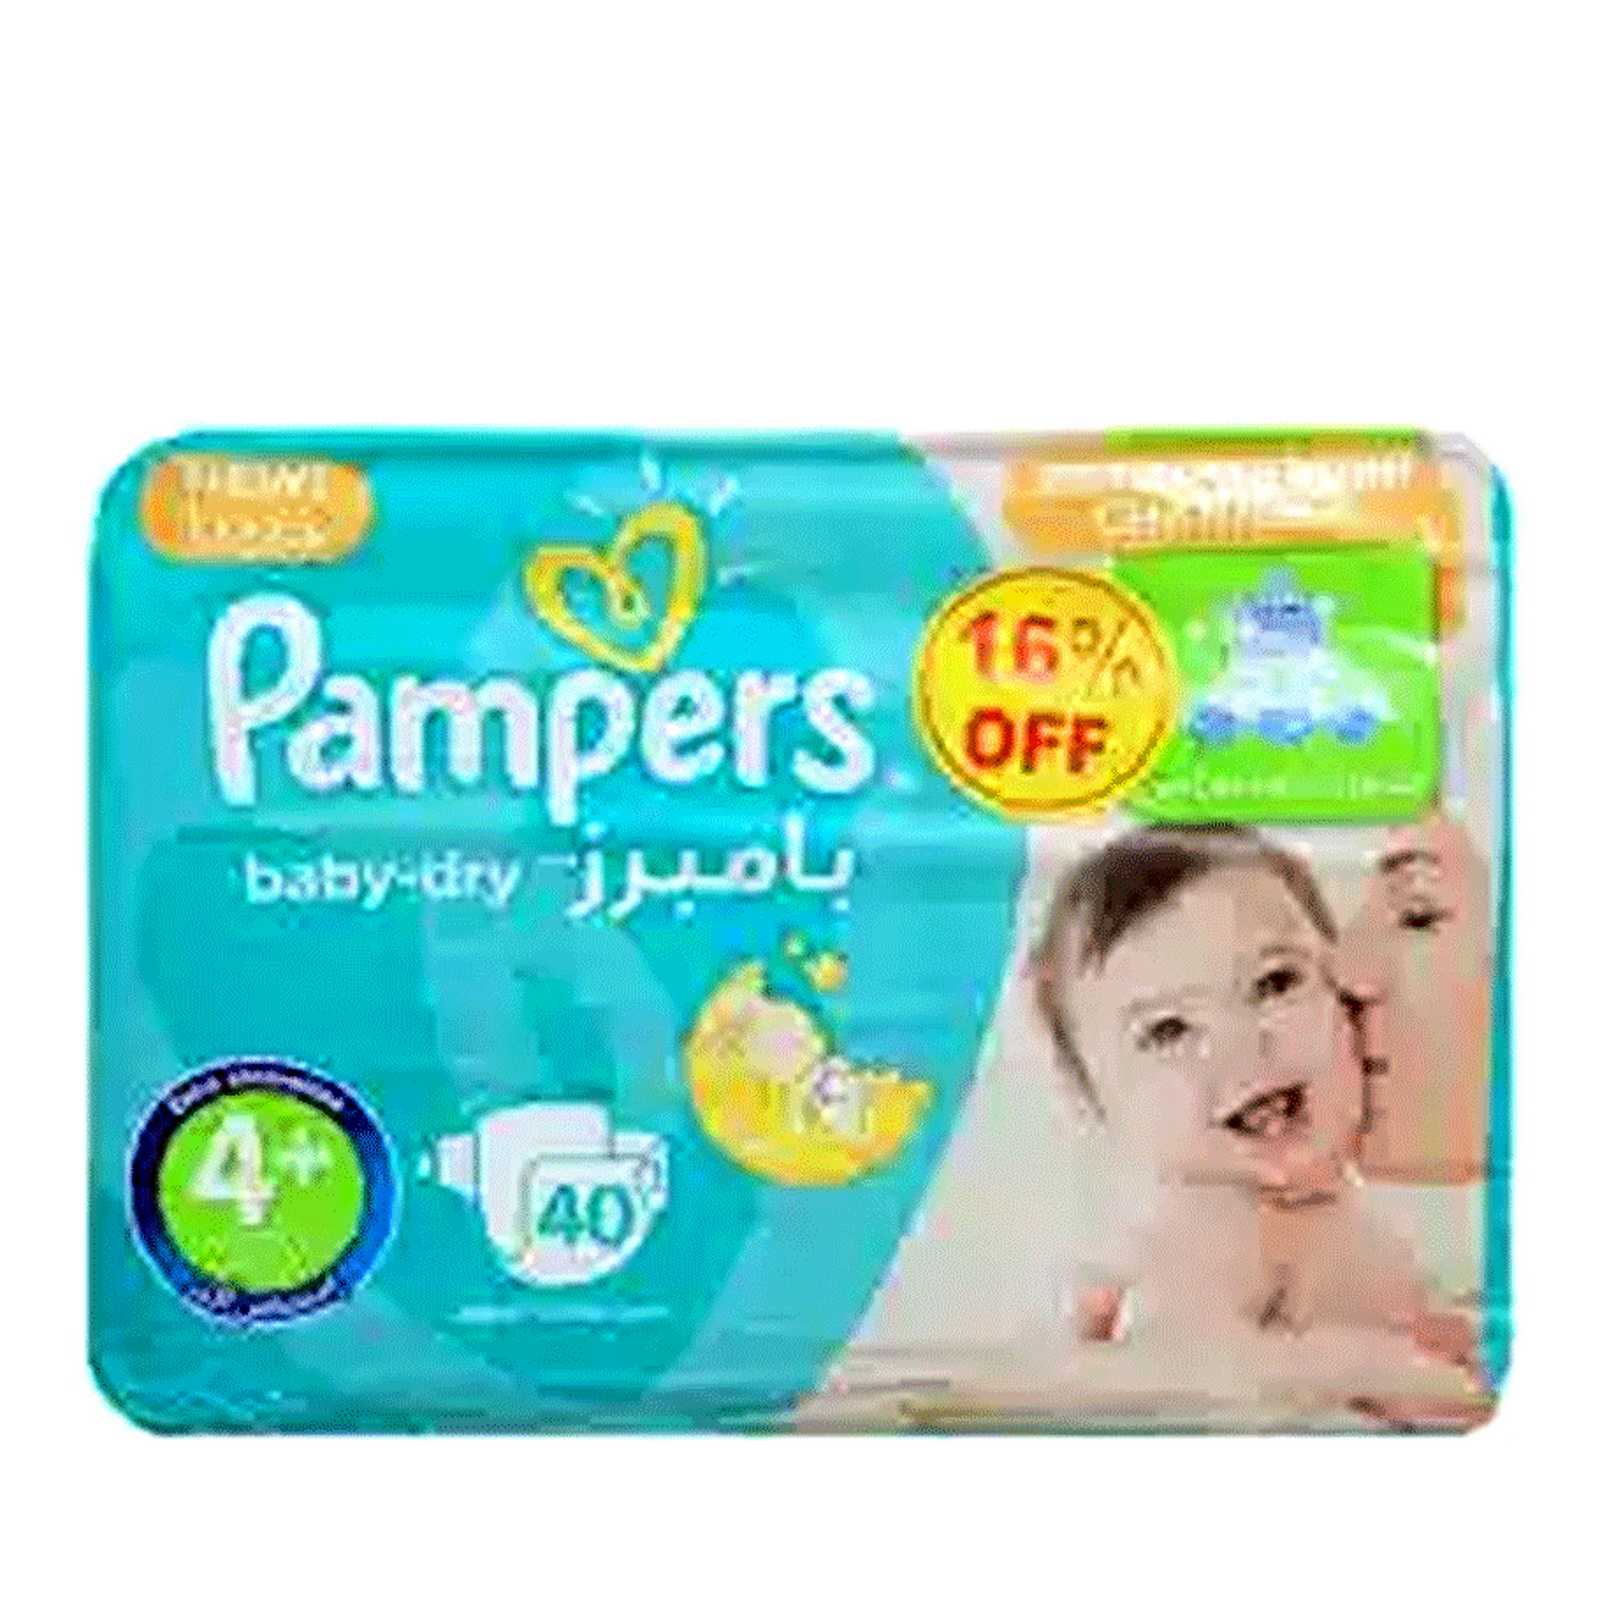 Pampers Baby Diaper L 9-16 kg - Chaldal 🥚Online Grocery Shopping and in Bangladesh | Buy fresh food items, personal care, baby products and more